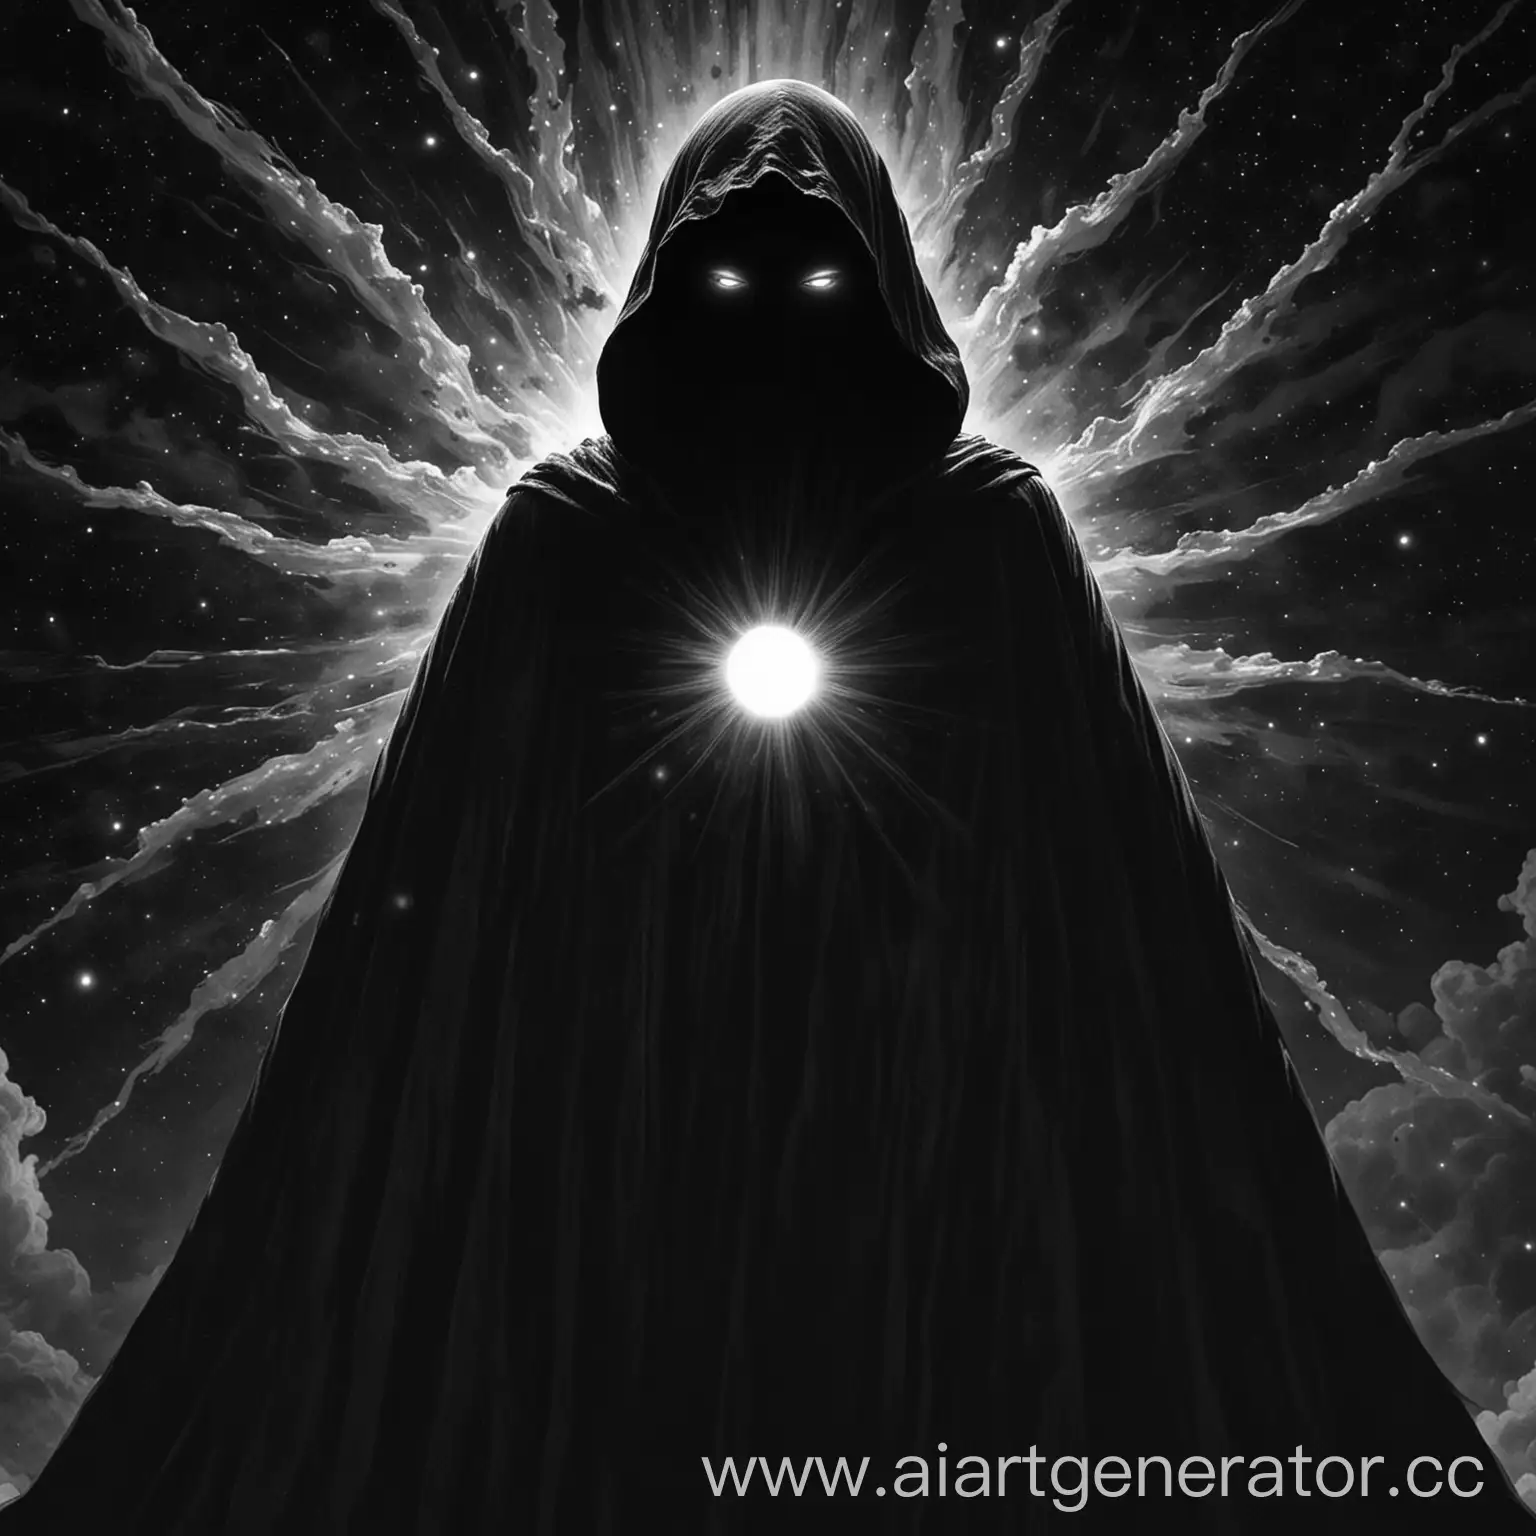 Mysterious-Cosmic-Entity-in-a-Cloak-with-White-Eyes